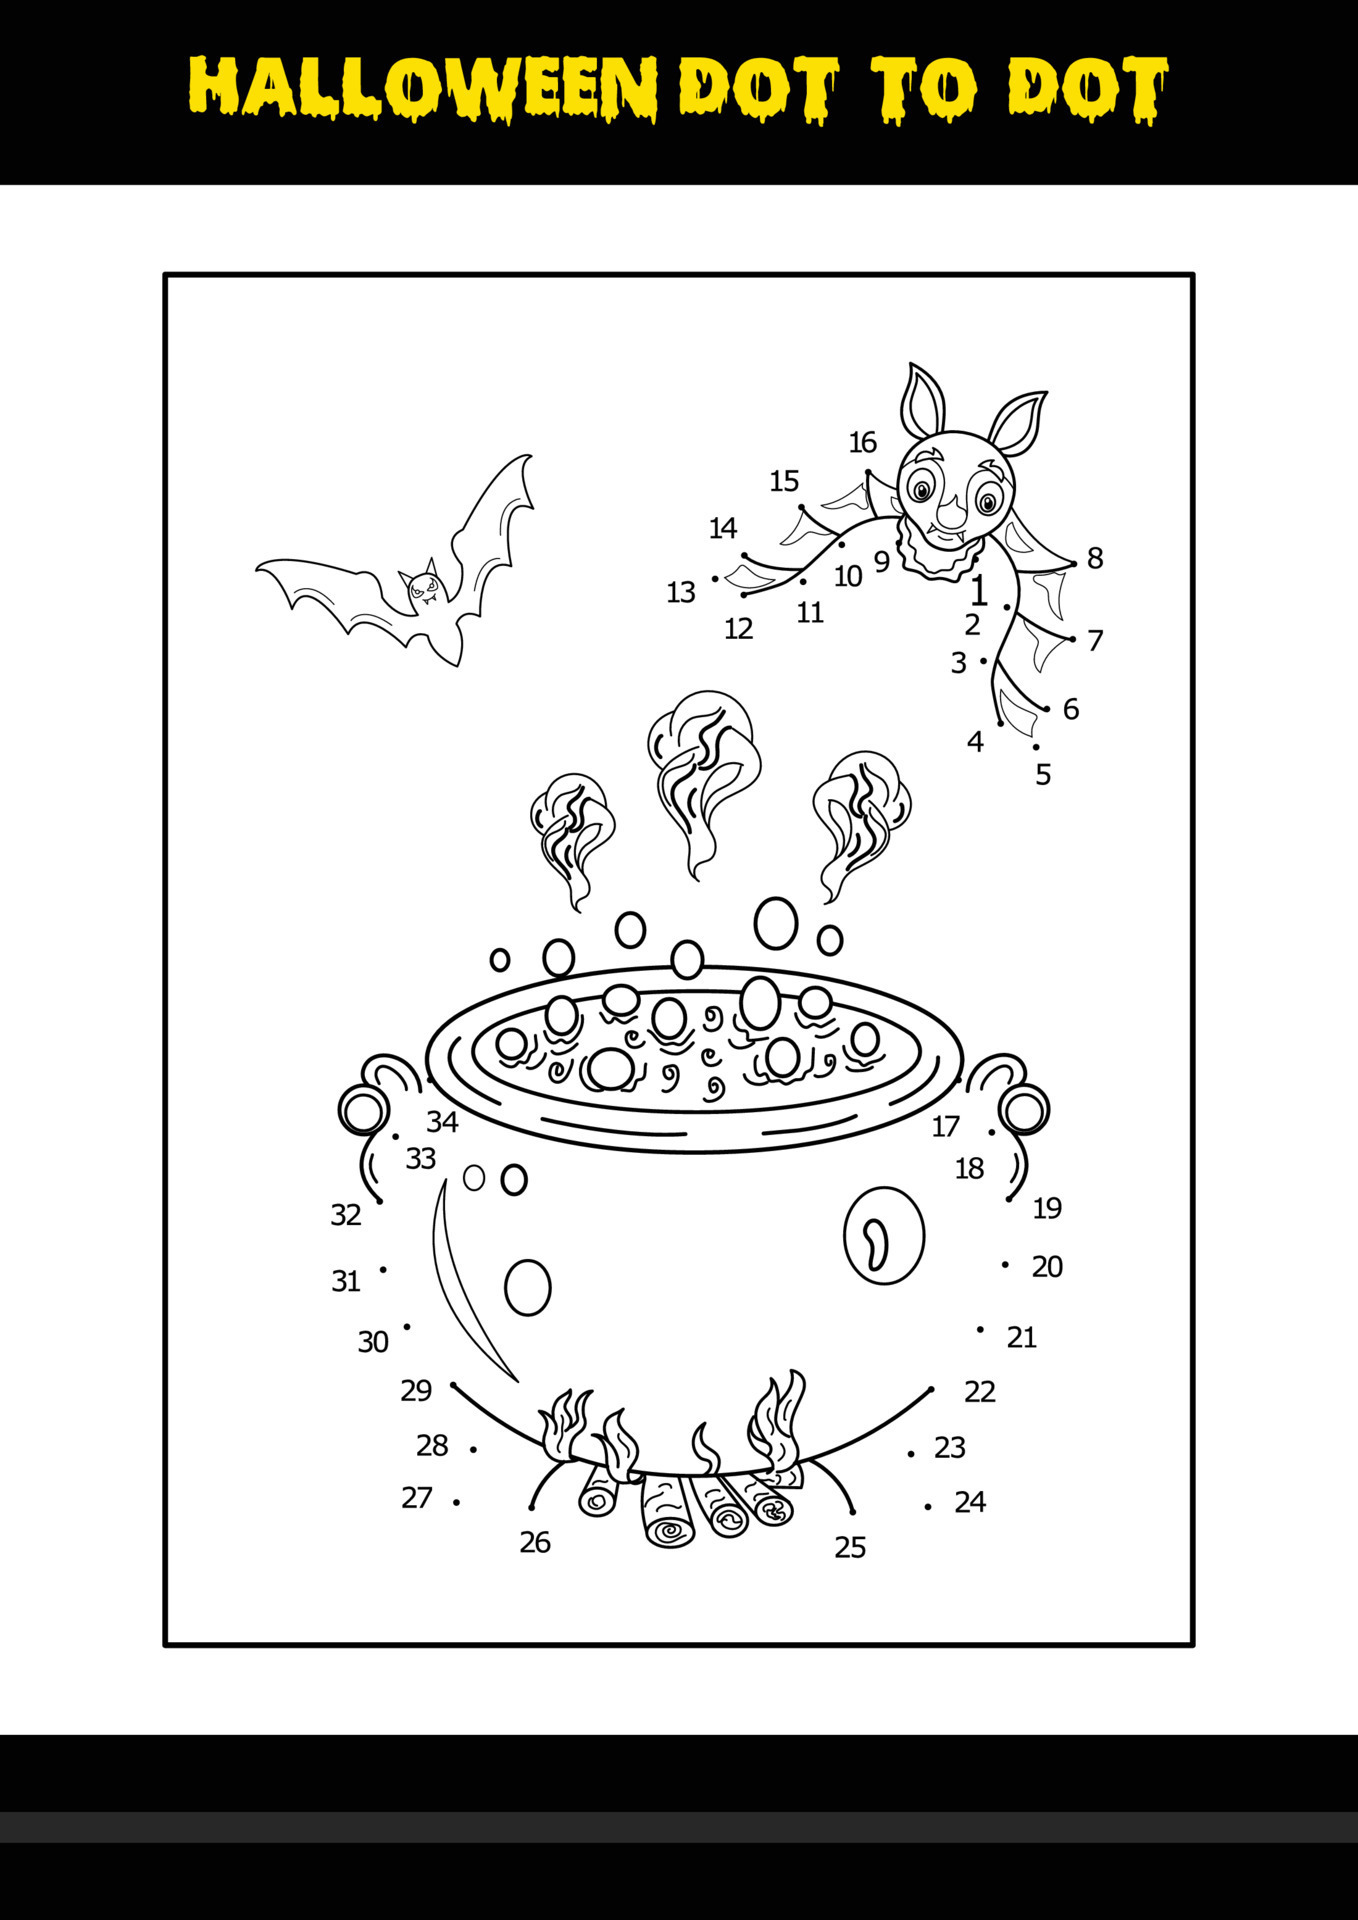 halloween-dot-to-dot-coloring-page-for-kids-line-art-coloring-page-design-for-kids-12136212